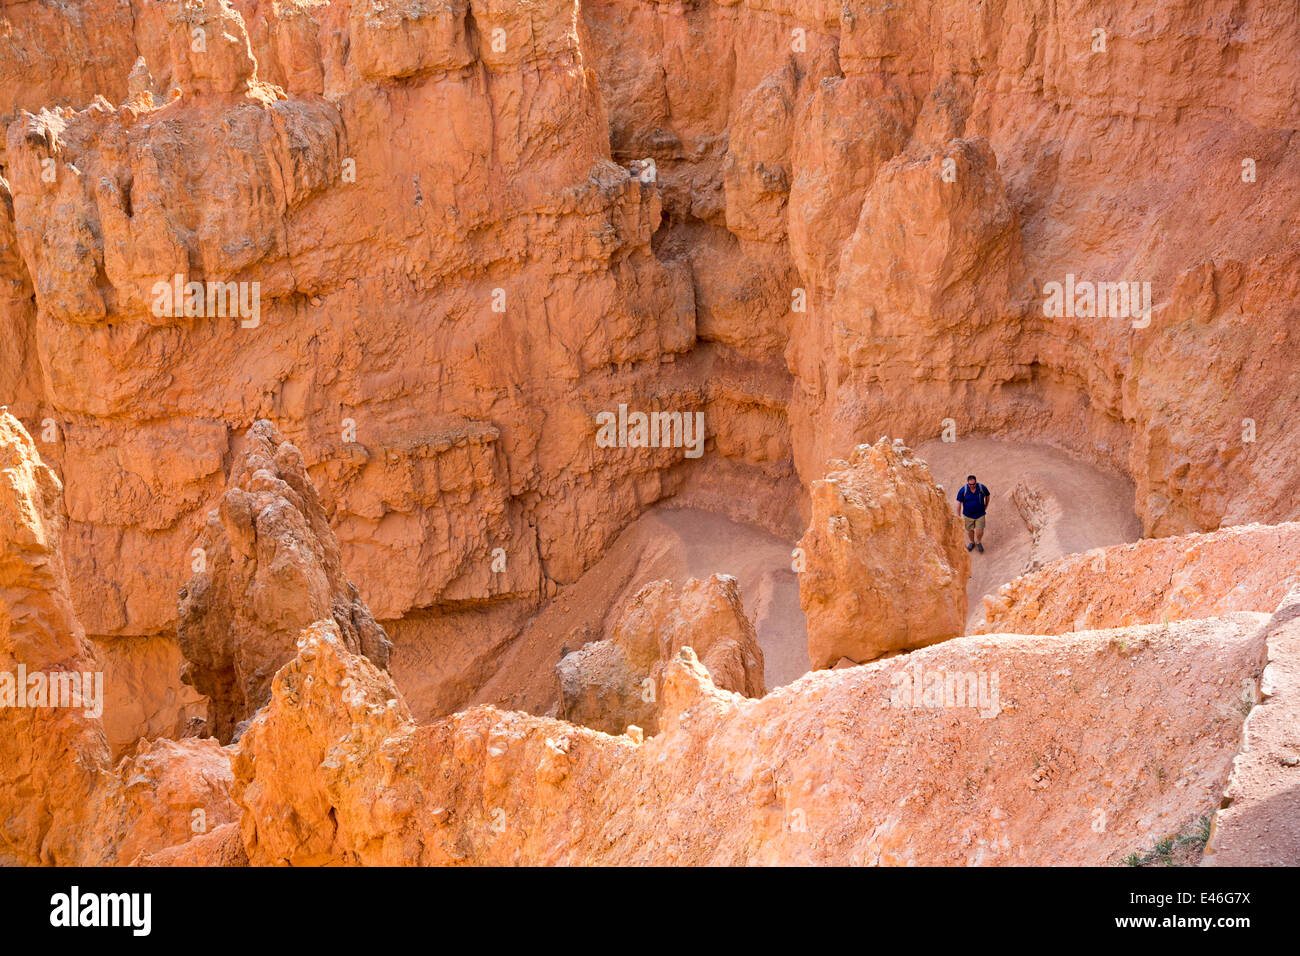 Tropic, Utah - A hiker on the Navajo Loop Trail in Bryce Canyon National Park. Stock Photo